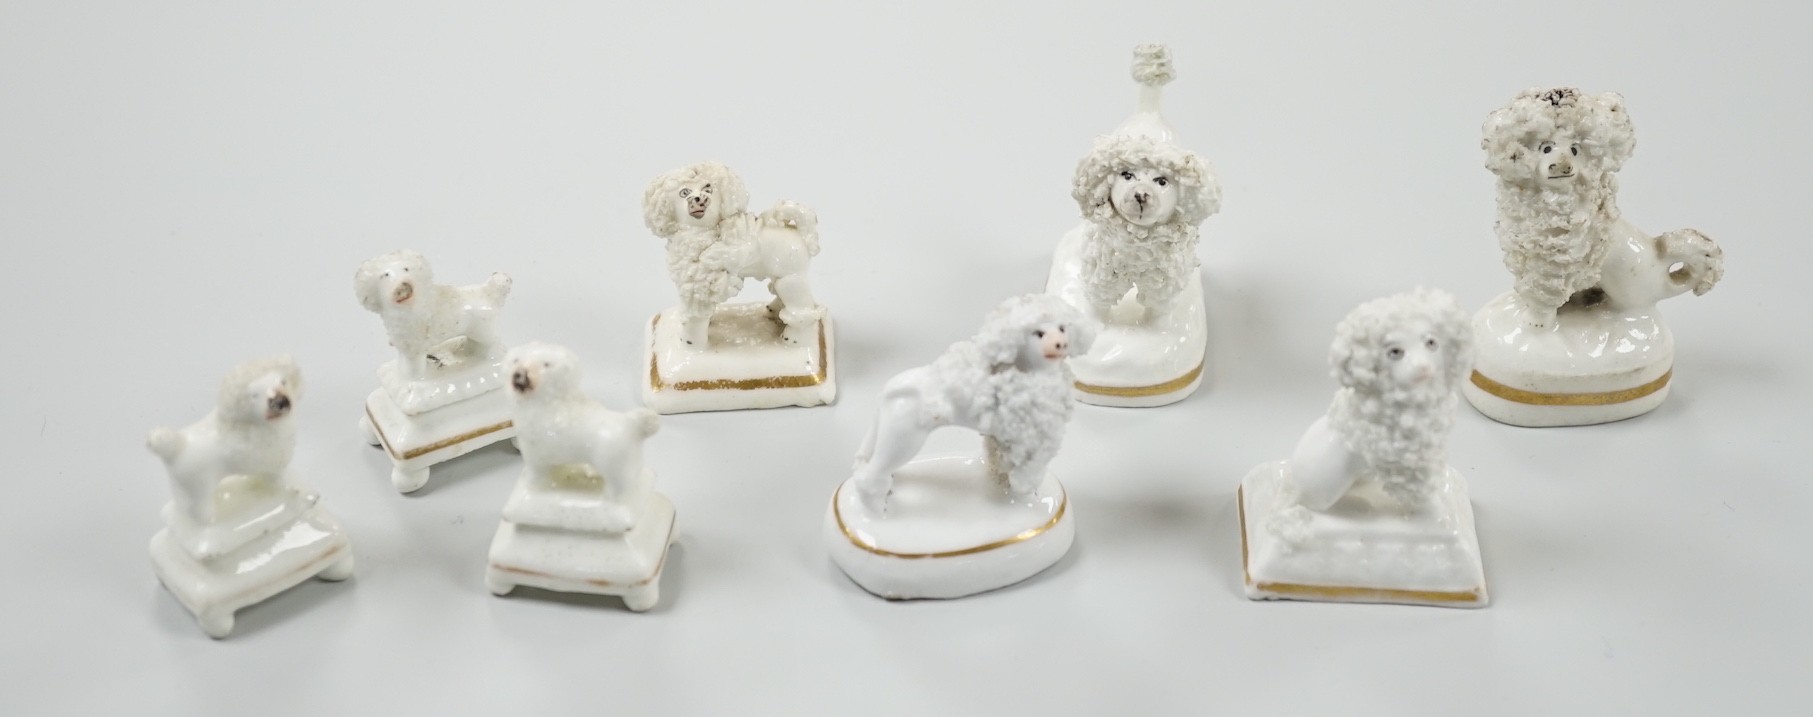 Four small Staffordshire porcelain models of poodles, together with five toy Staffordshire models of poodles, c.1830-50. Largest 5cm tall, Provenance- Dennis G Rice collection